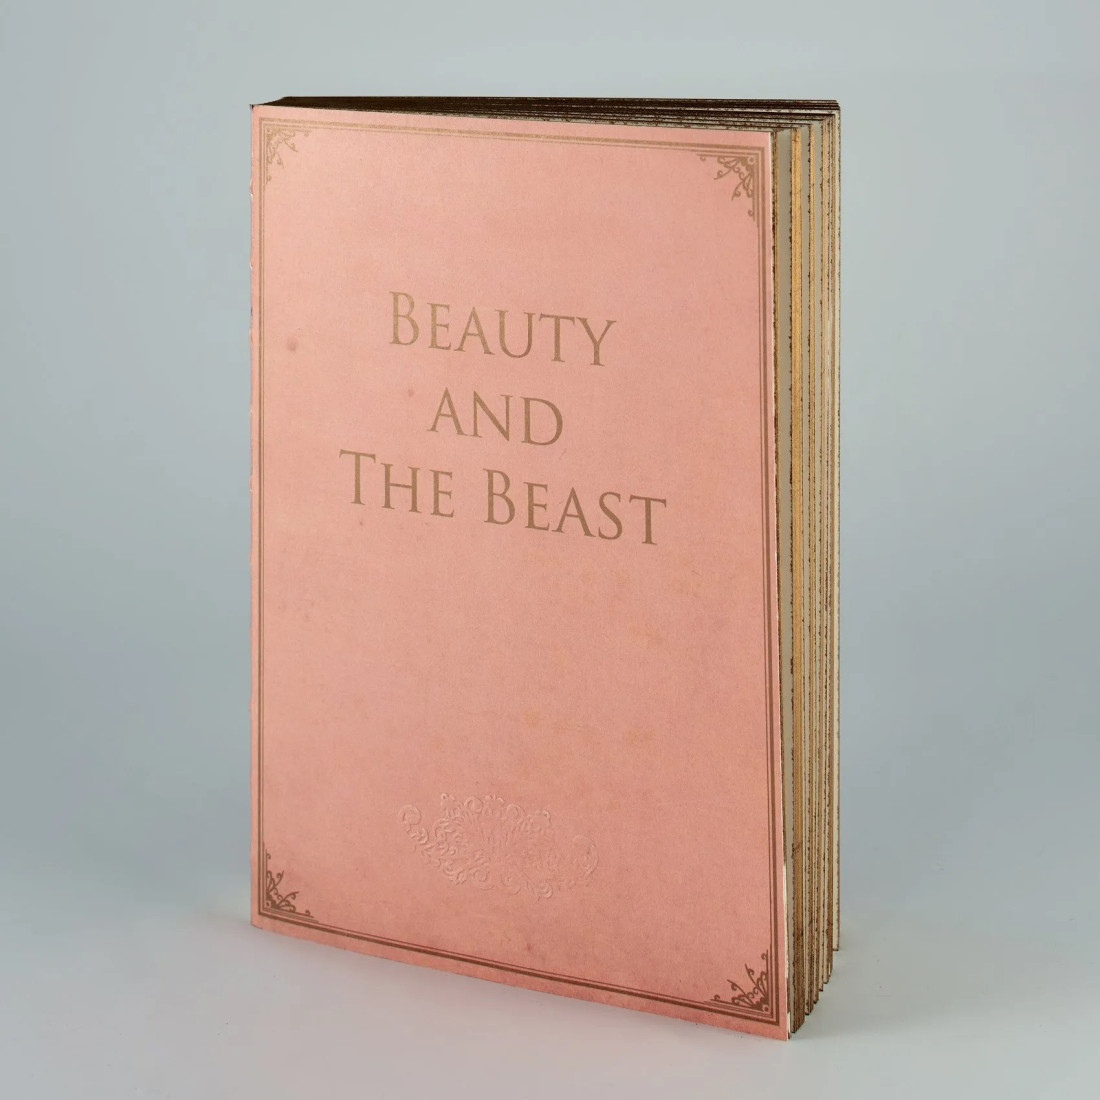 ANTIQUE NOTEBOOK Beauty and the beast LIBRI MUTI